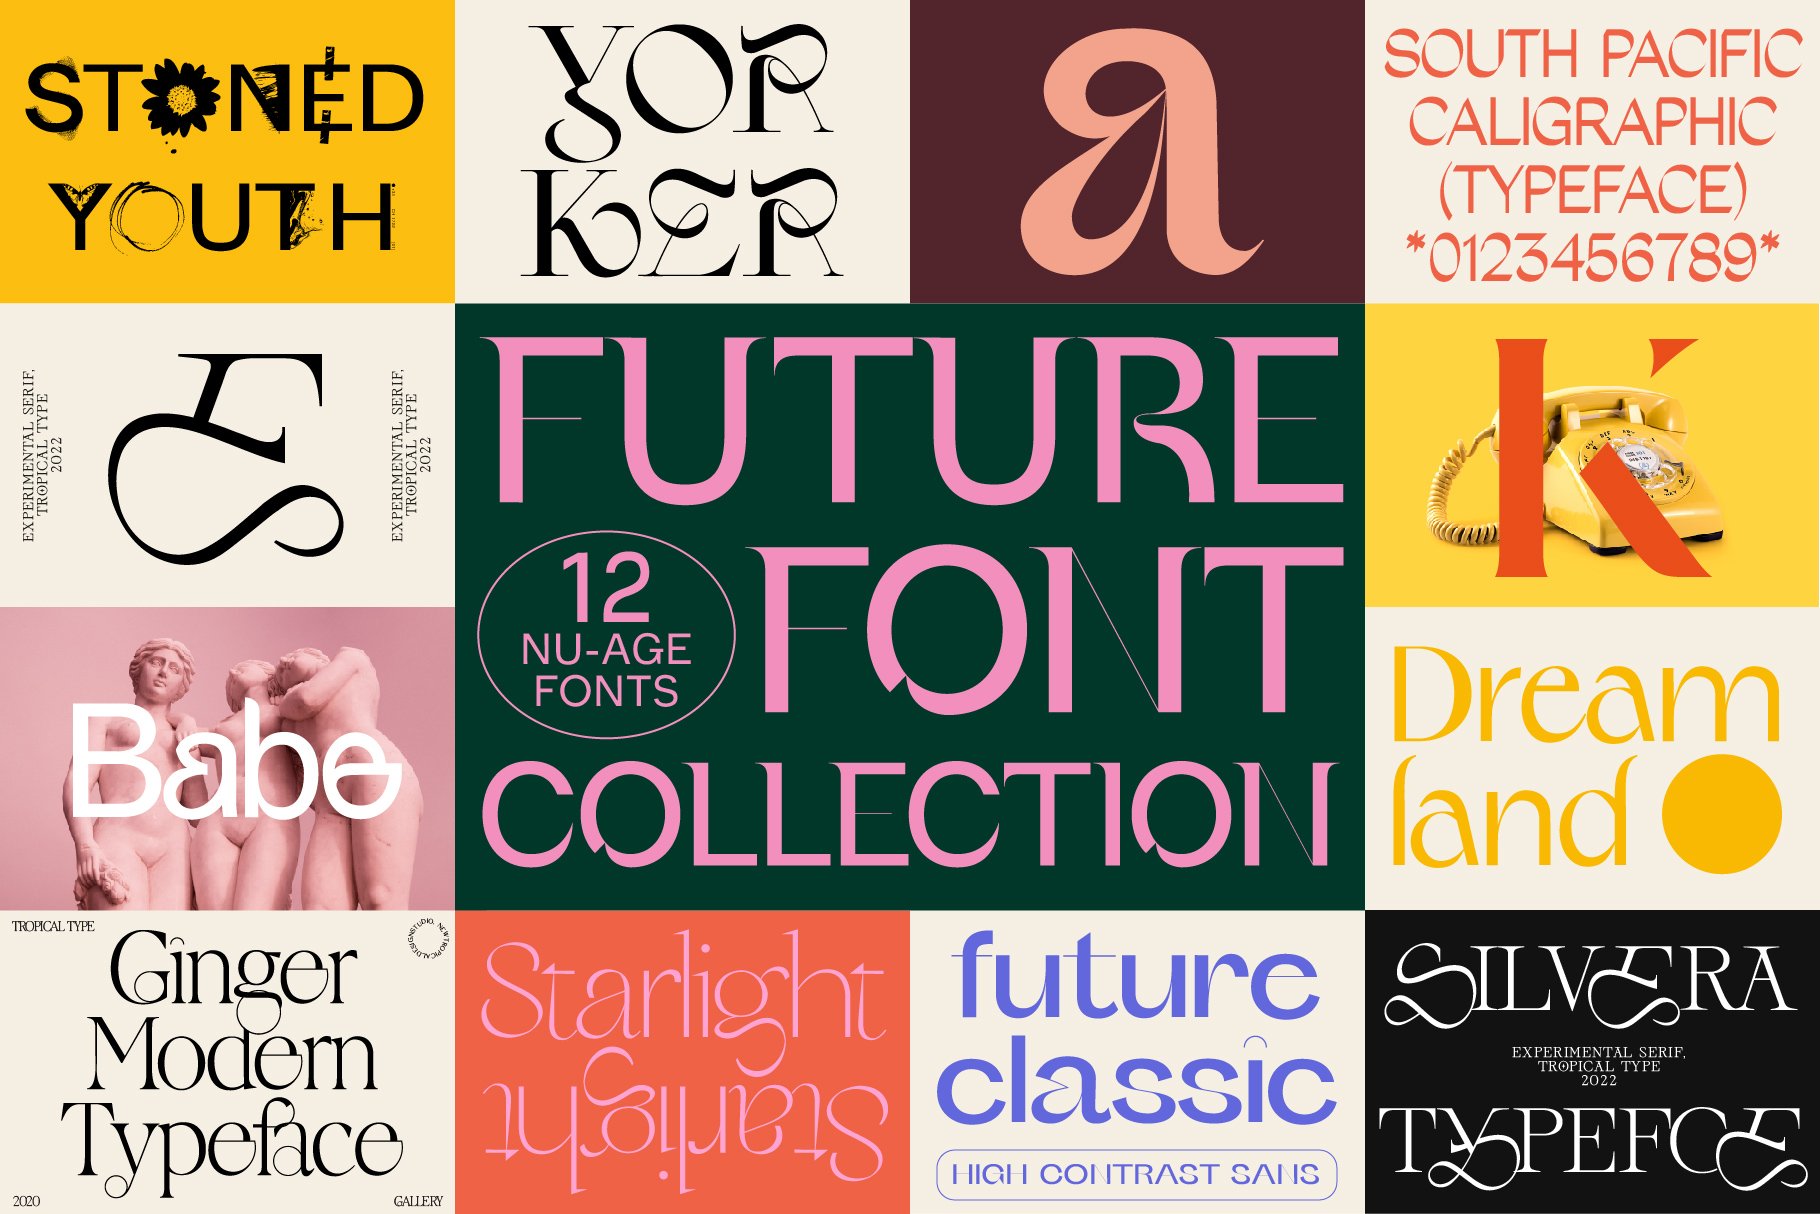 The Future Font Collection cover image.